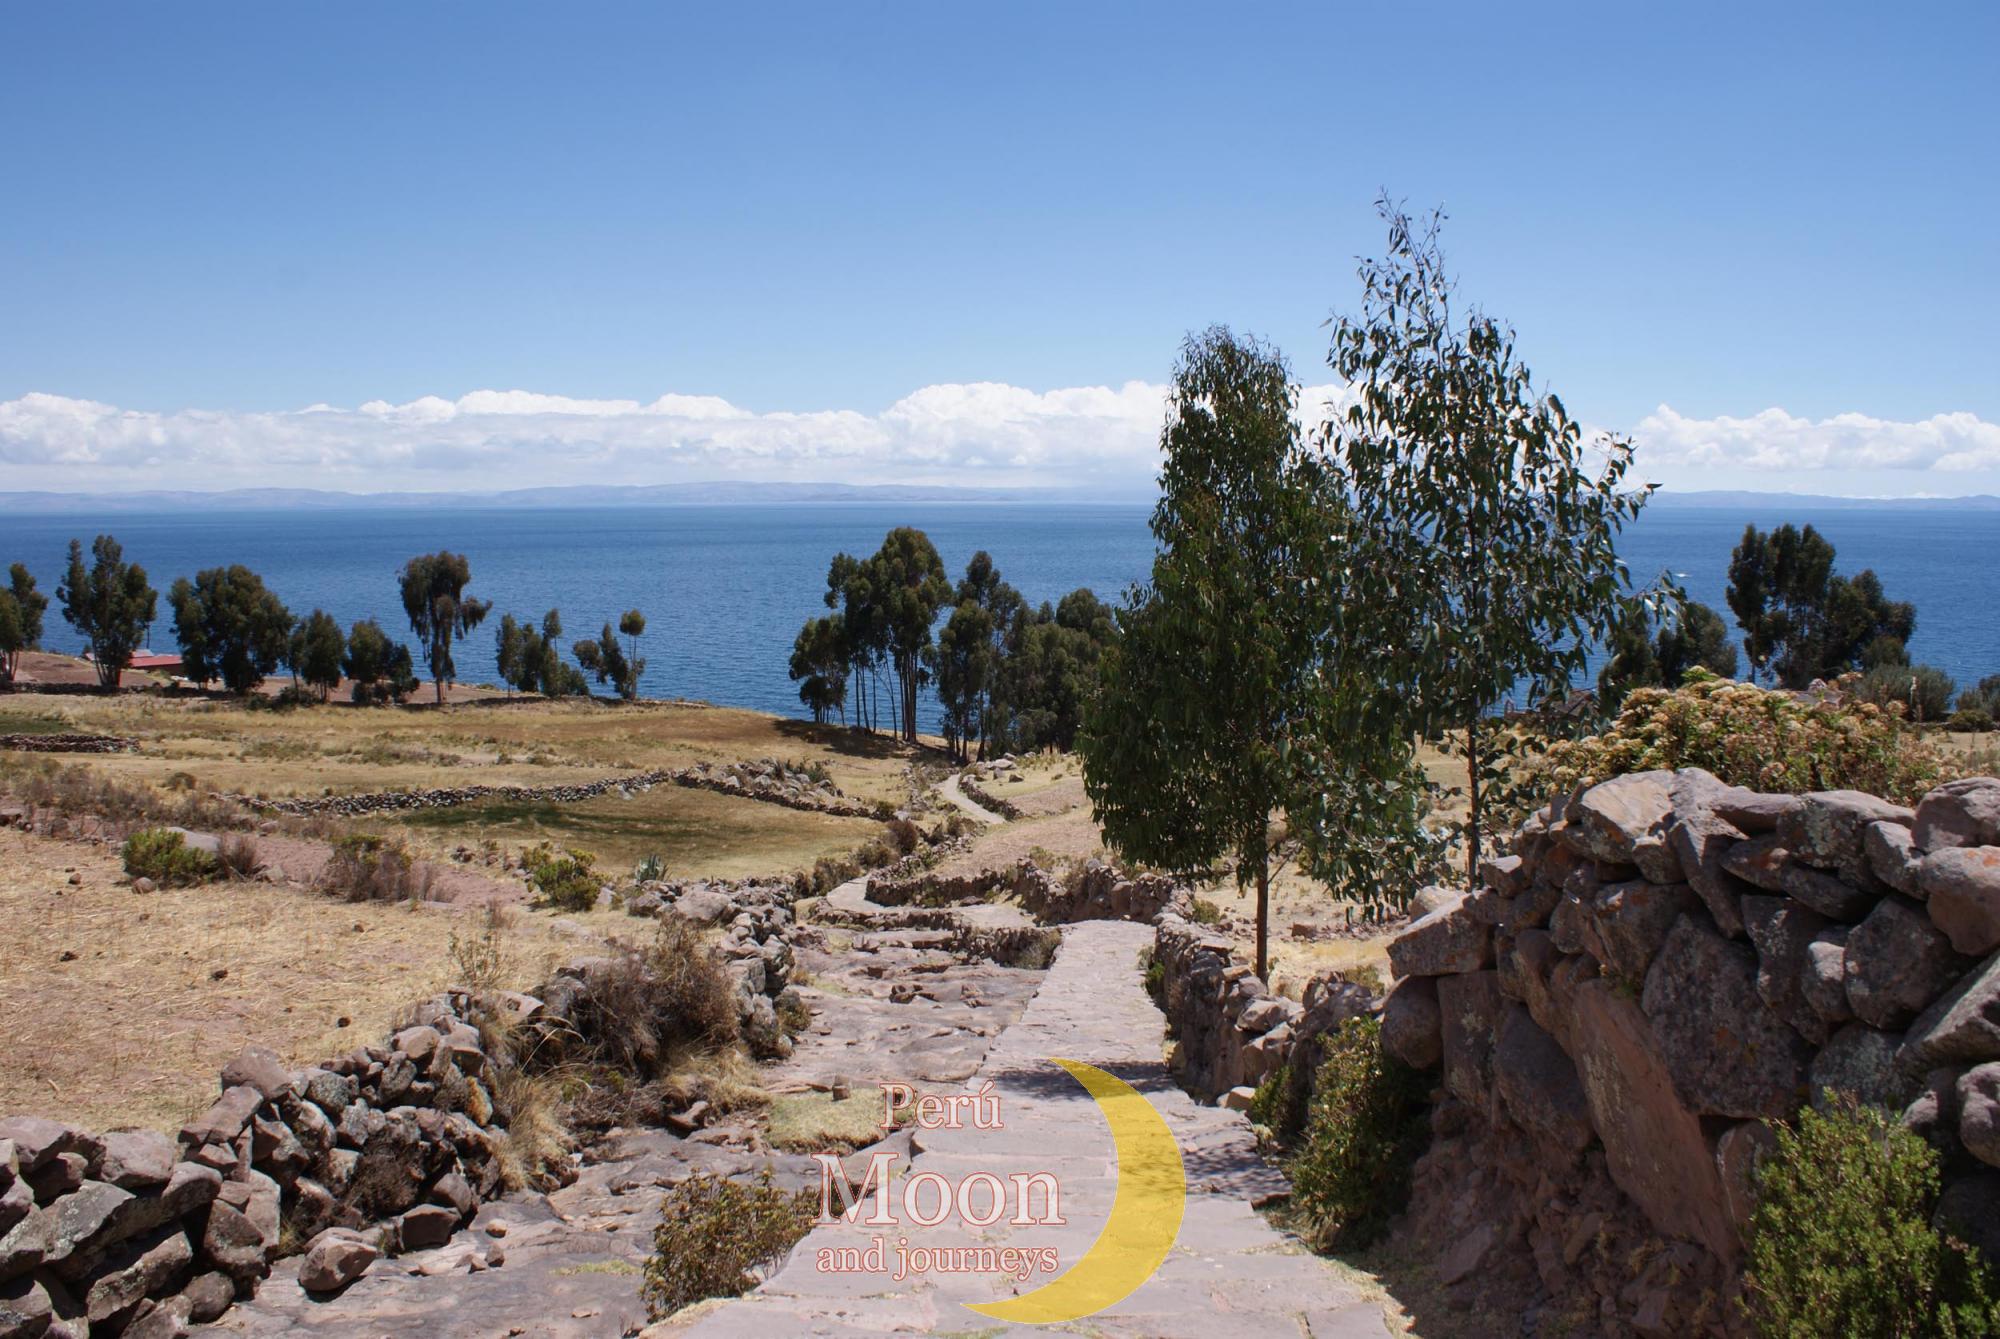 Landscape of the island of Taquile